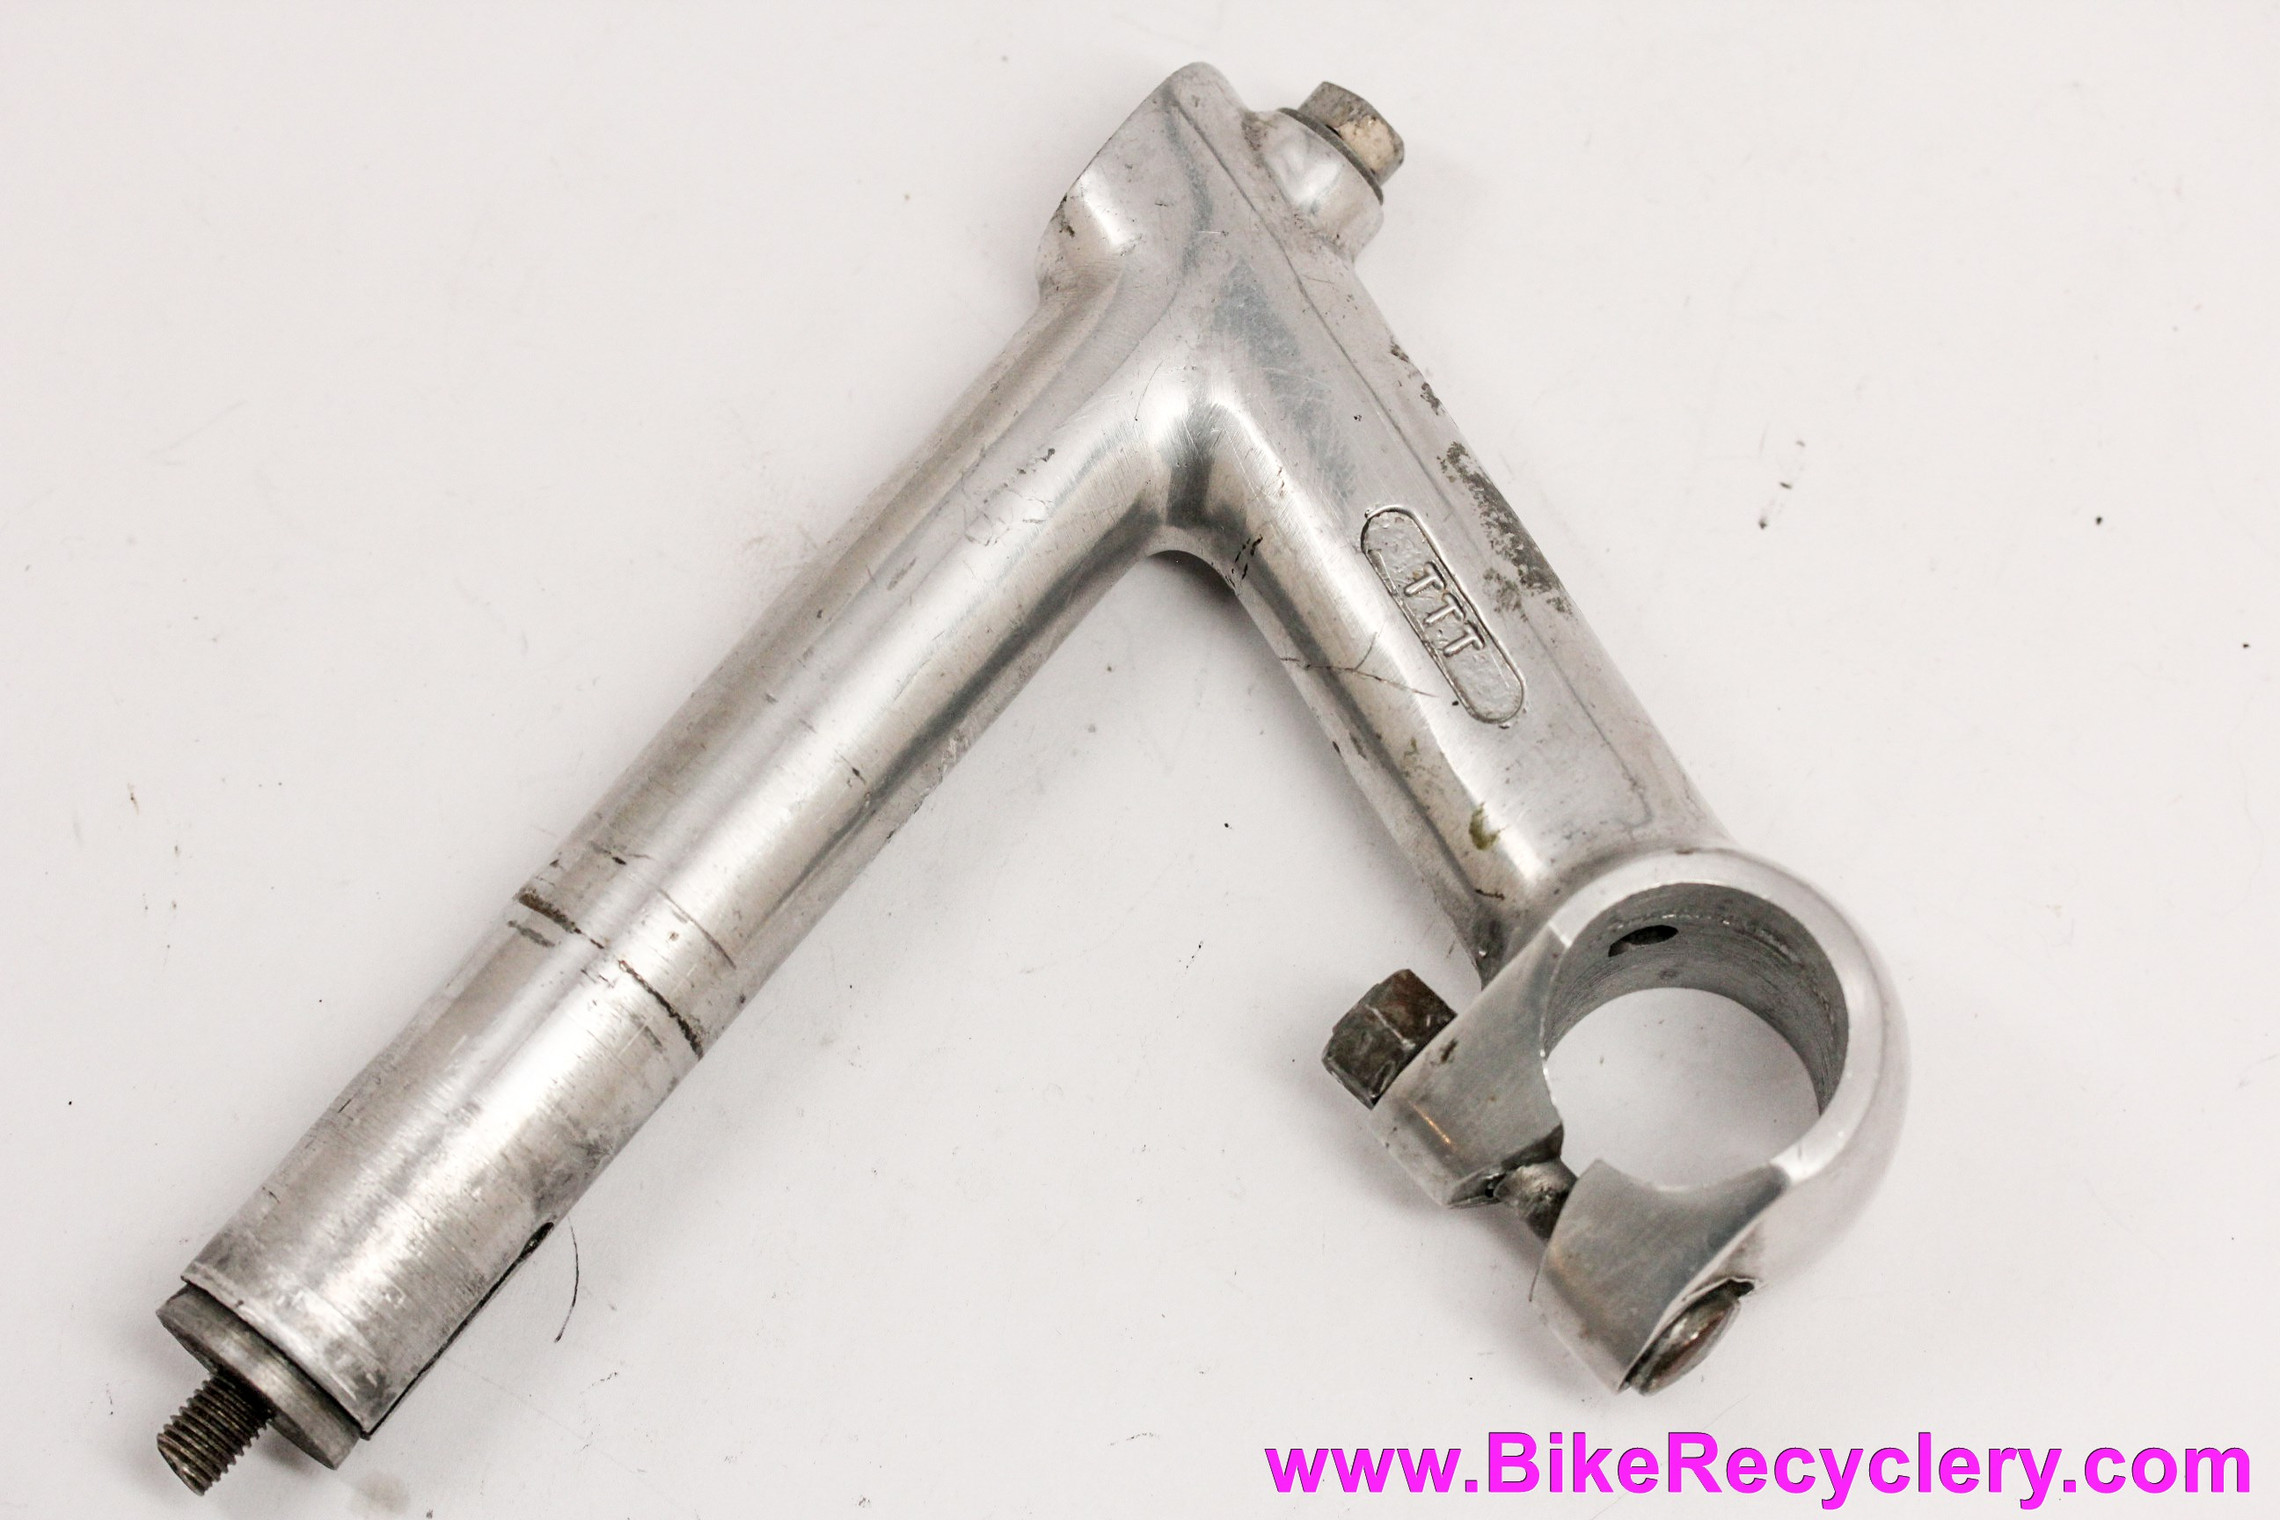 3ttt Record Strada Quill Stem: 1st Gen! 1960's or early 70's - 85mm x 26.0mm